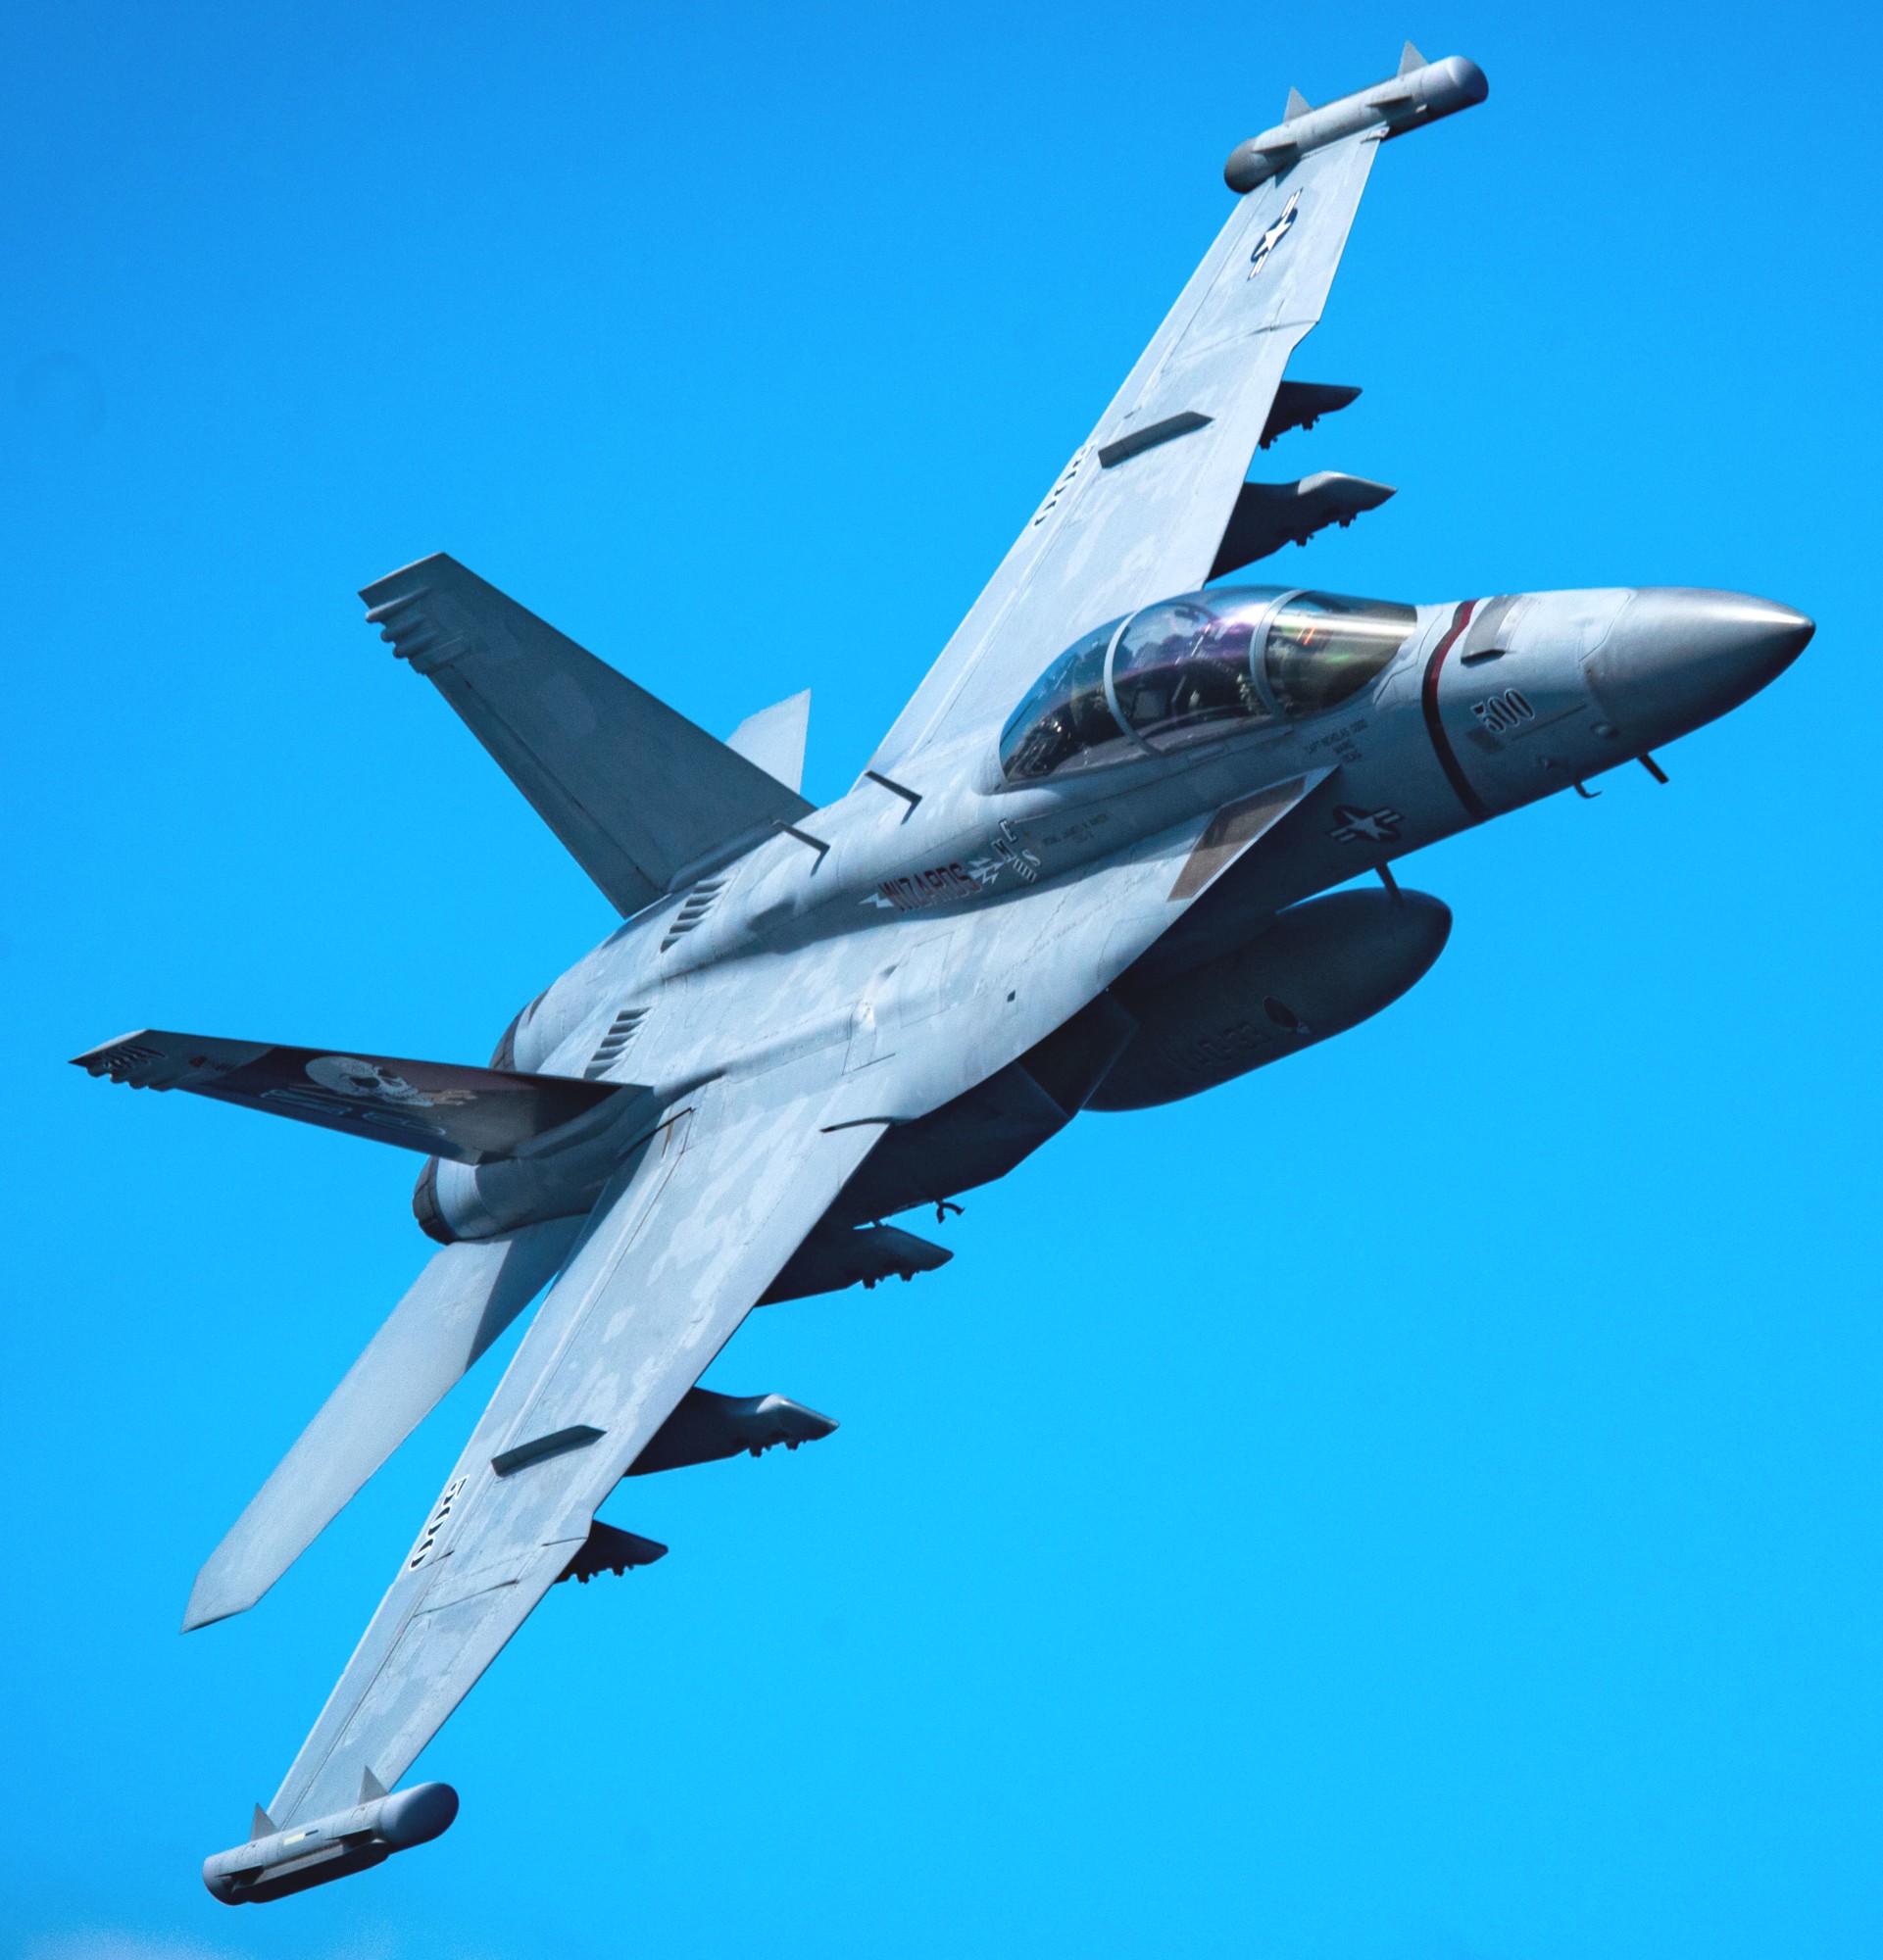 vaq-133 wizards electronic attack squadron vaqron us navy boeing ea-18g growler 73